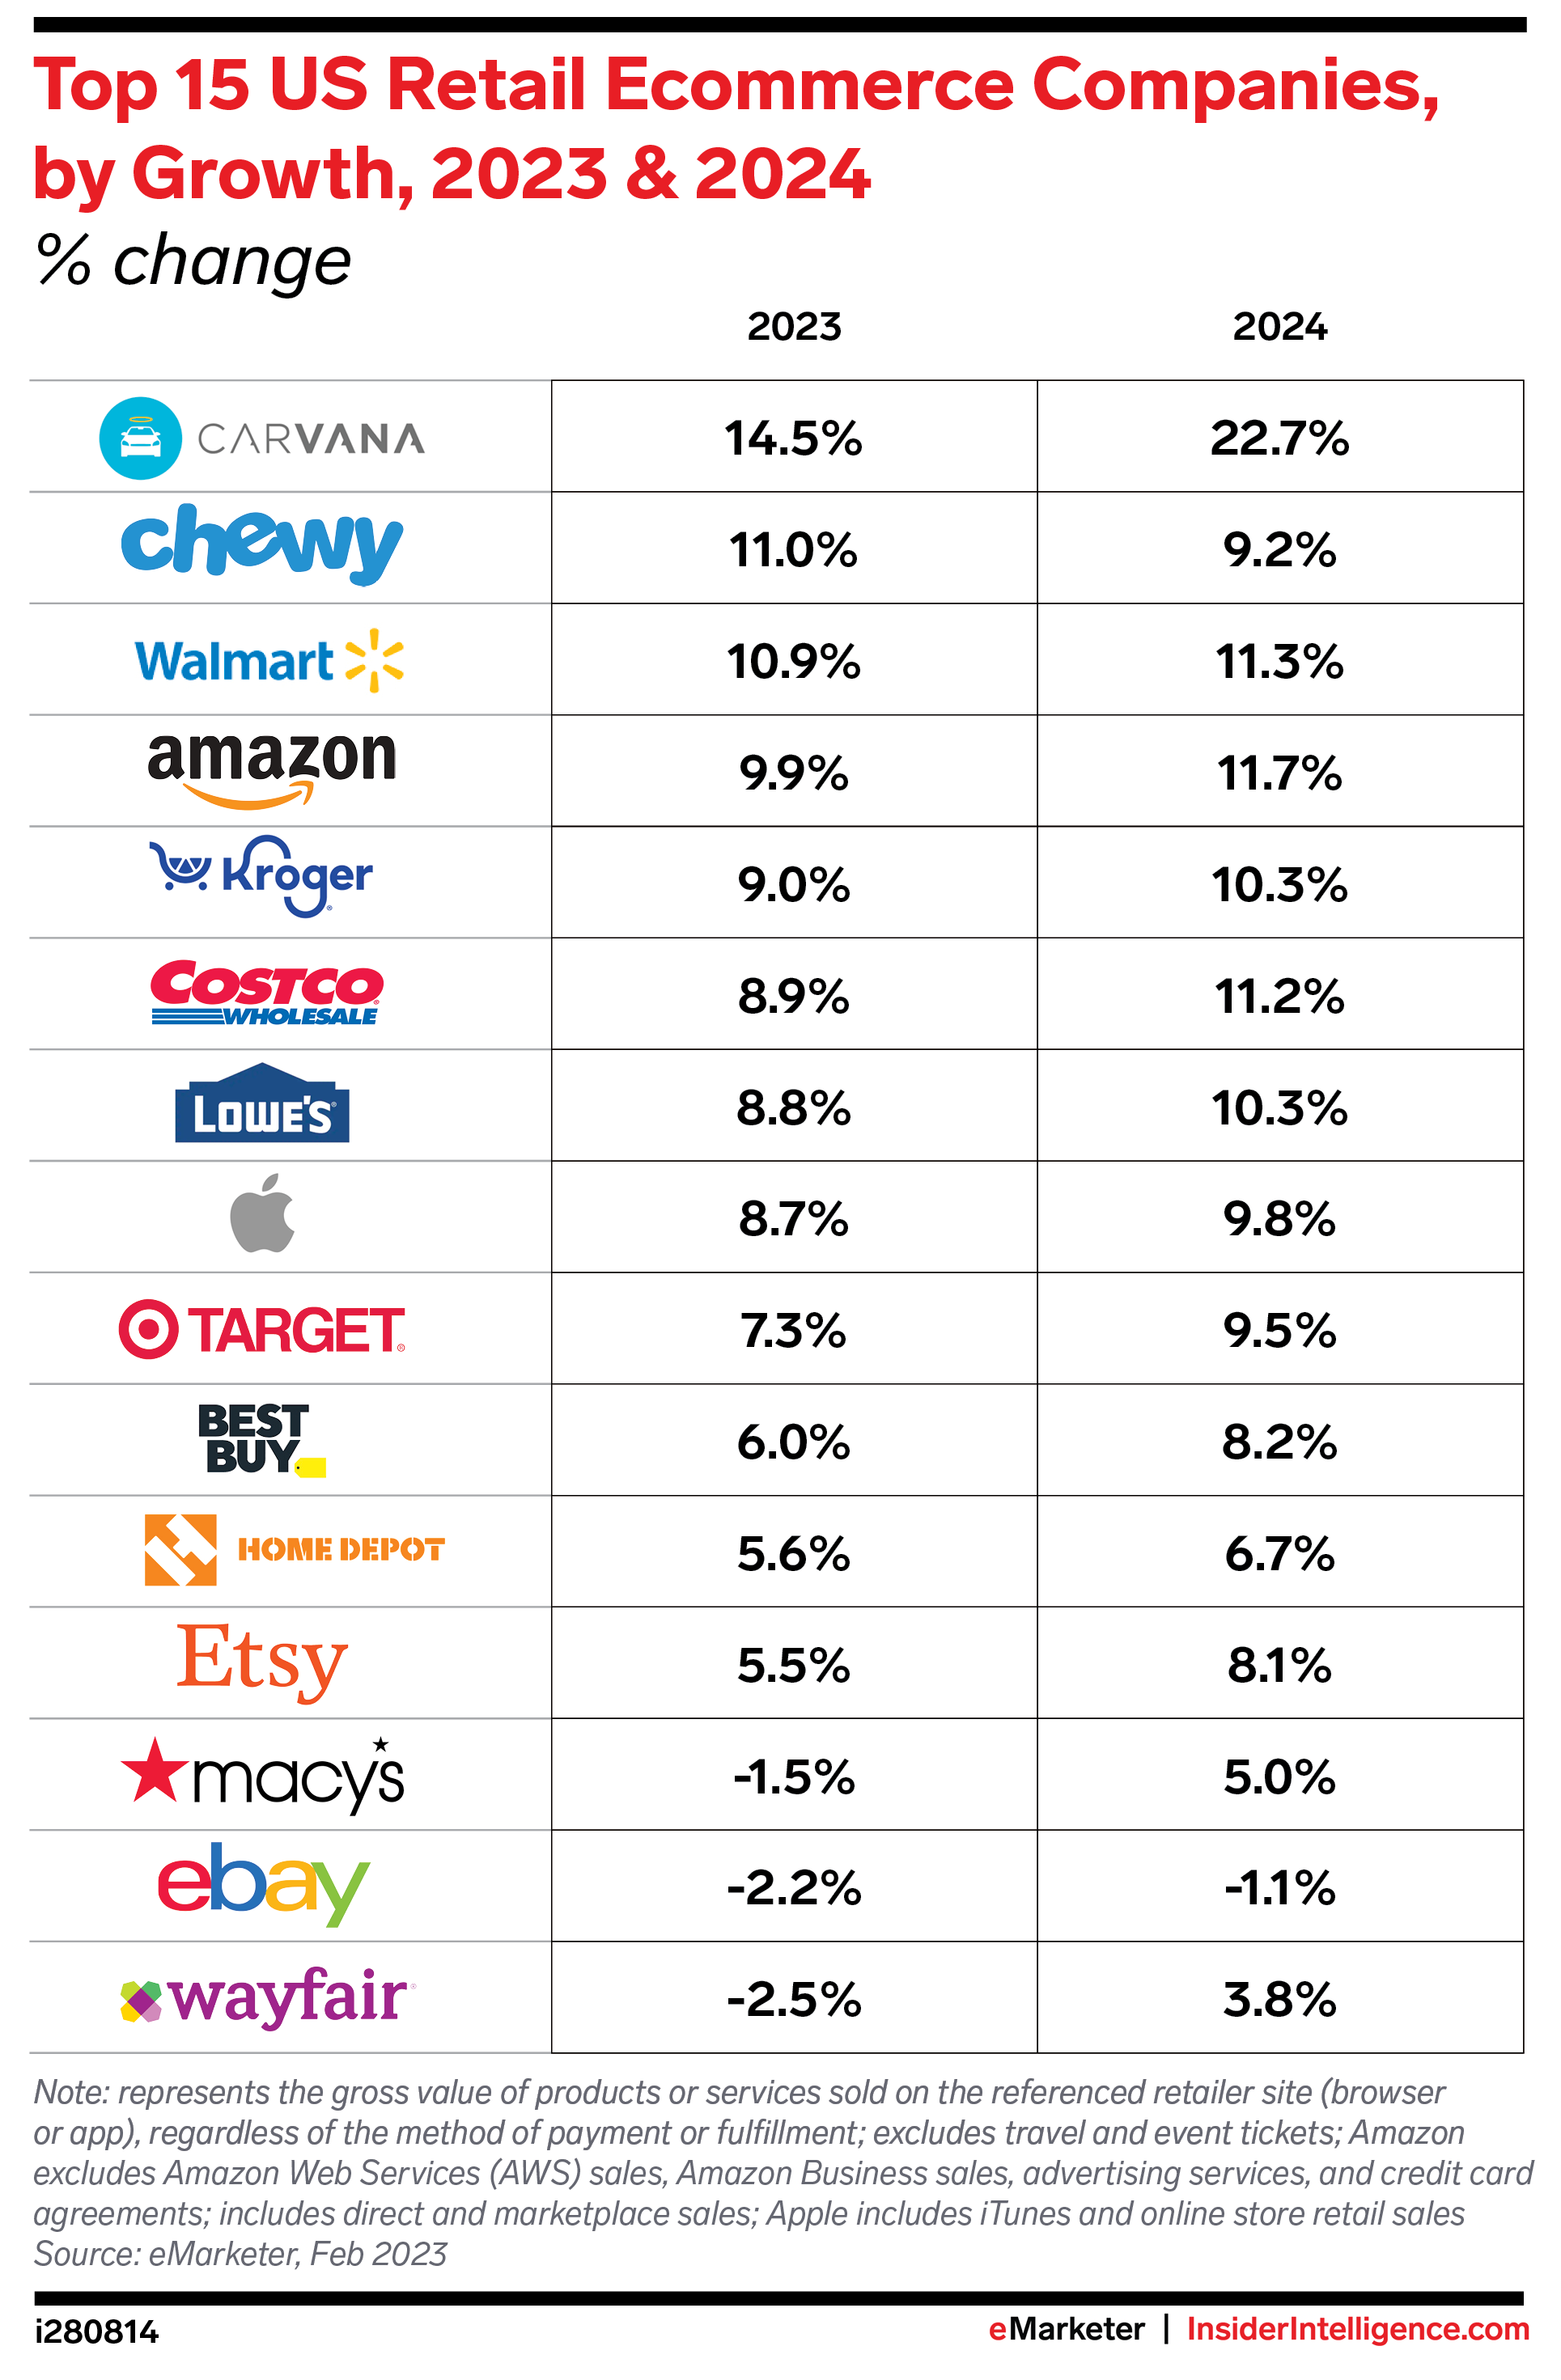 Top 15 US Sales Ecommerce Companies, by Sales Growth, 2023-2024 (% change)